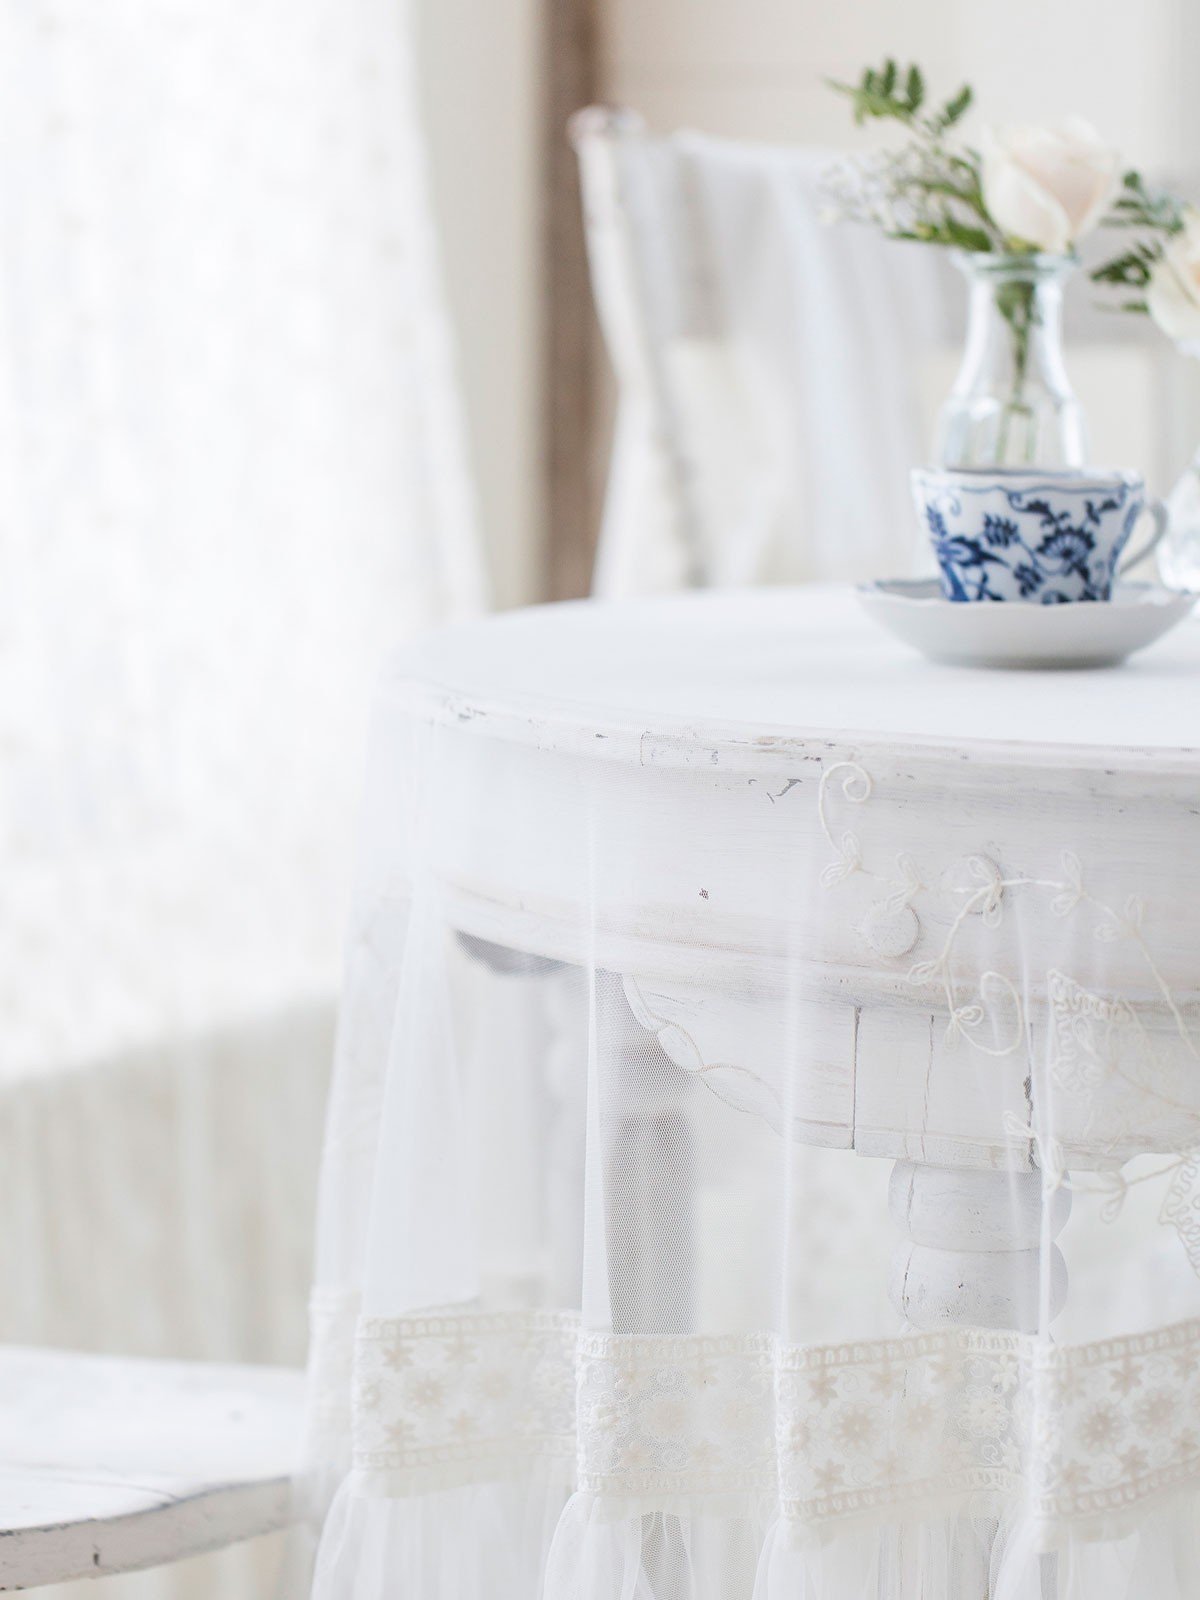 Tea Sheer Lace Round Cloth in Ecru | April Cornell- SOLD OUT